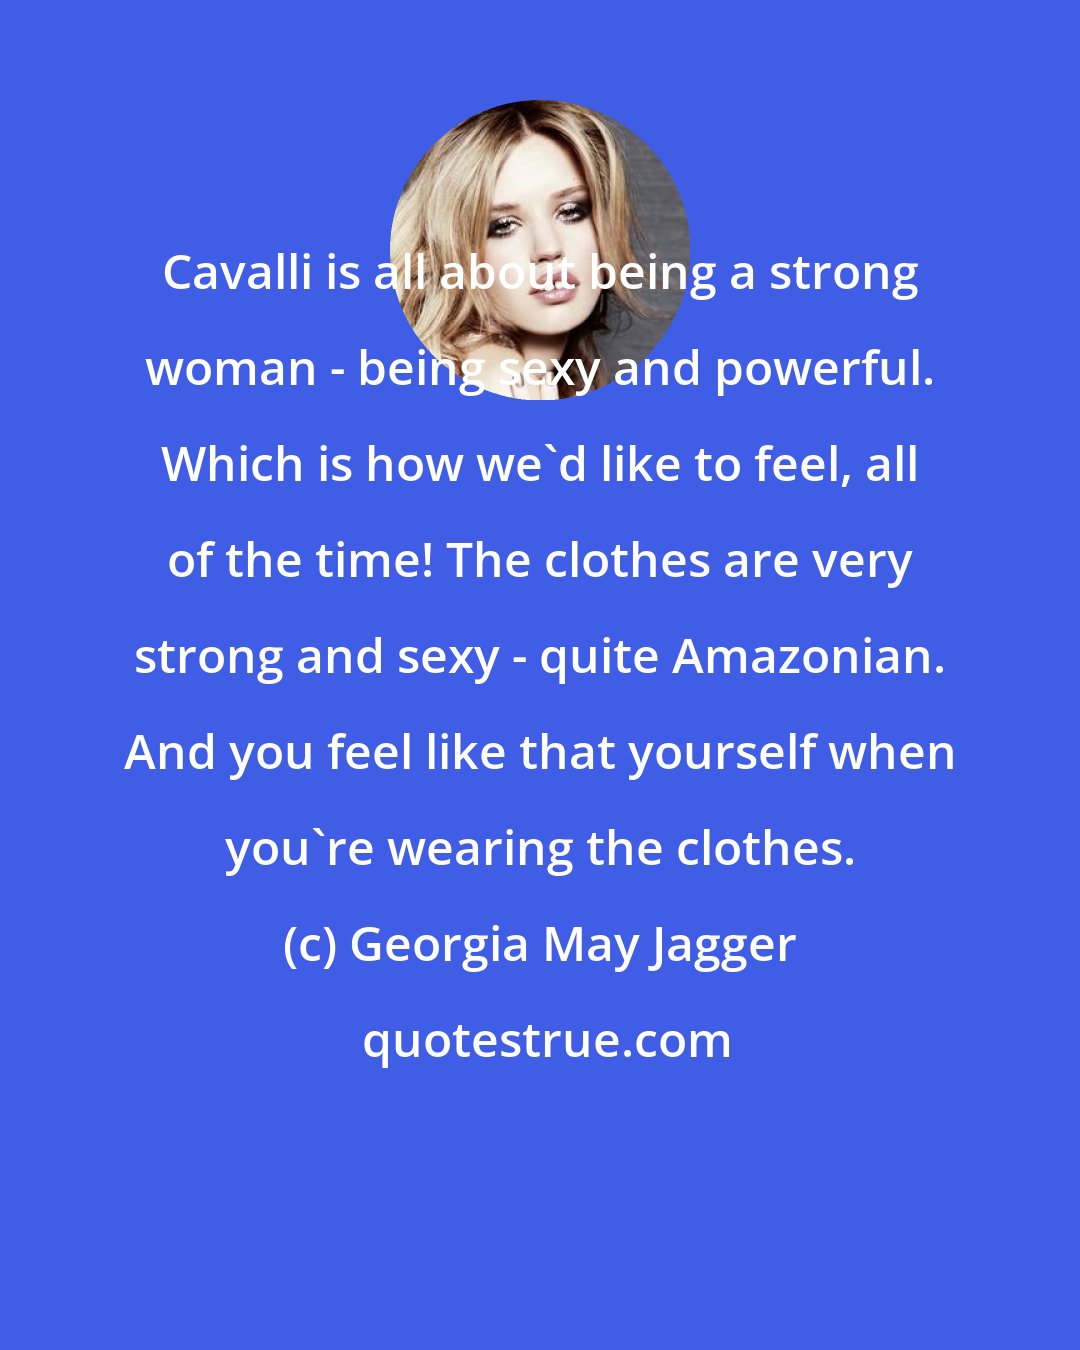 Georgia May Jagger: Cavalli is all about being a strong woman - being sexy and powerful. Which is how we'd like to feel, all of the time! The clothes are very strong and sexy - quite Amazonian. And you feel like that yourself when you're wearing the clothes.